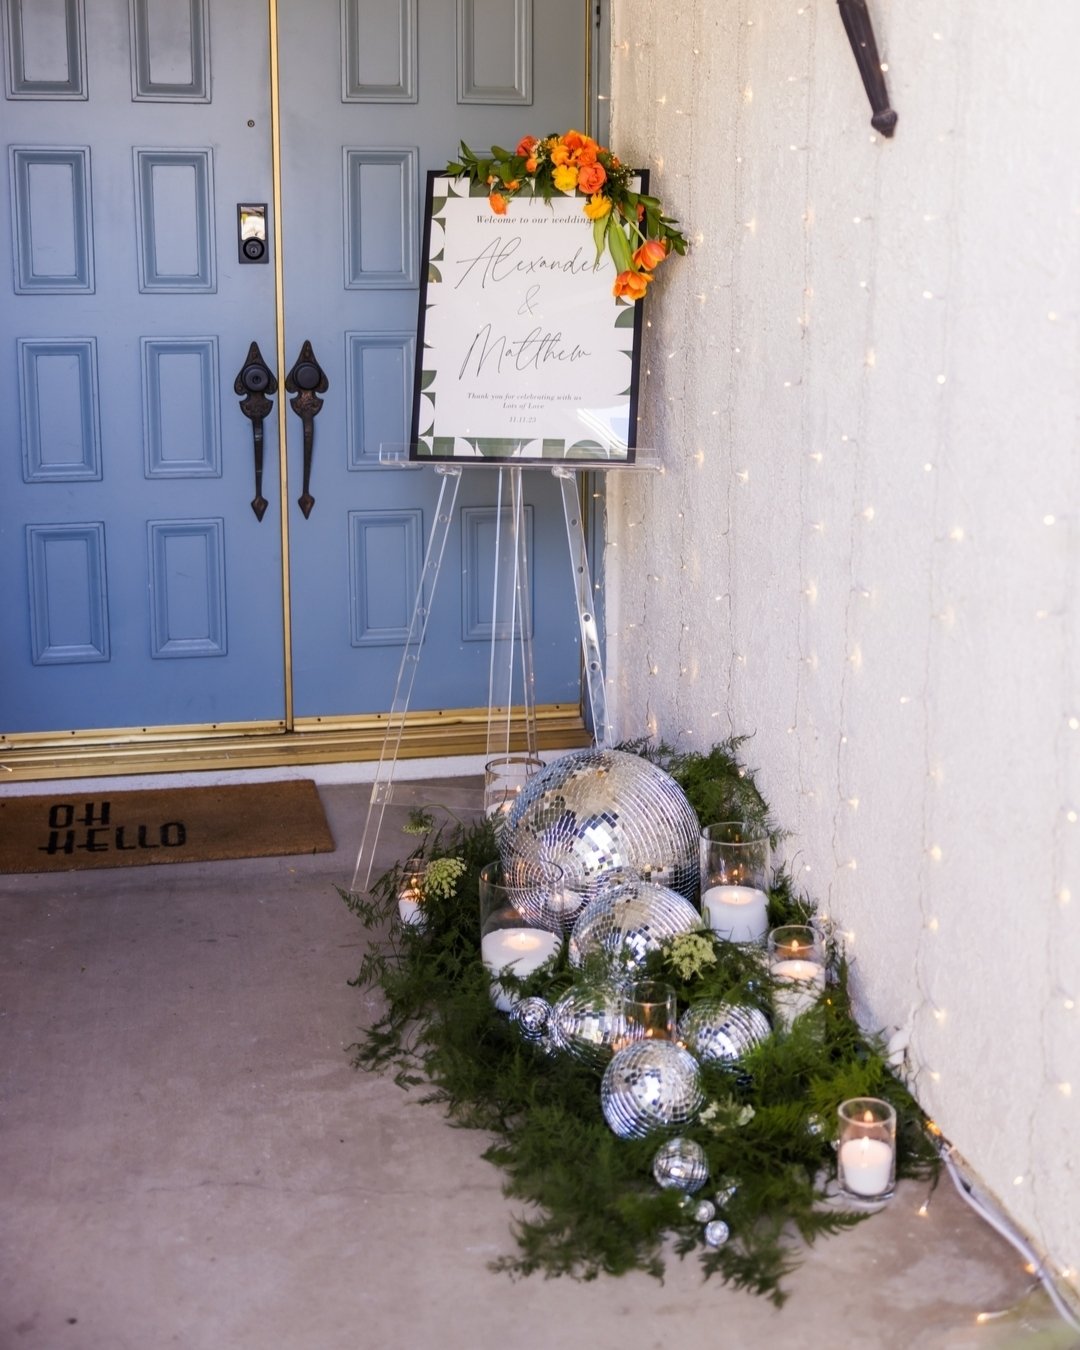 I am such a fan of good welcome areas. I think it sets the tone for what your guests can expect. Let us help you design a one of a kind greeting. 
Coordination Bestie @citruscityevents
Flowers, Custom Arbor, Orbs @ruckus_rentals
Photography @lightfra